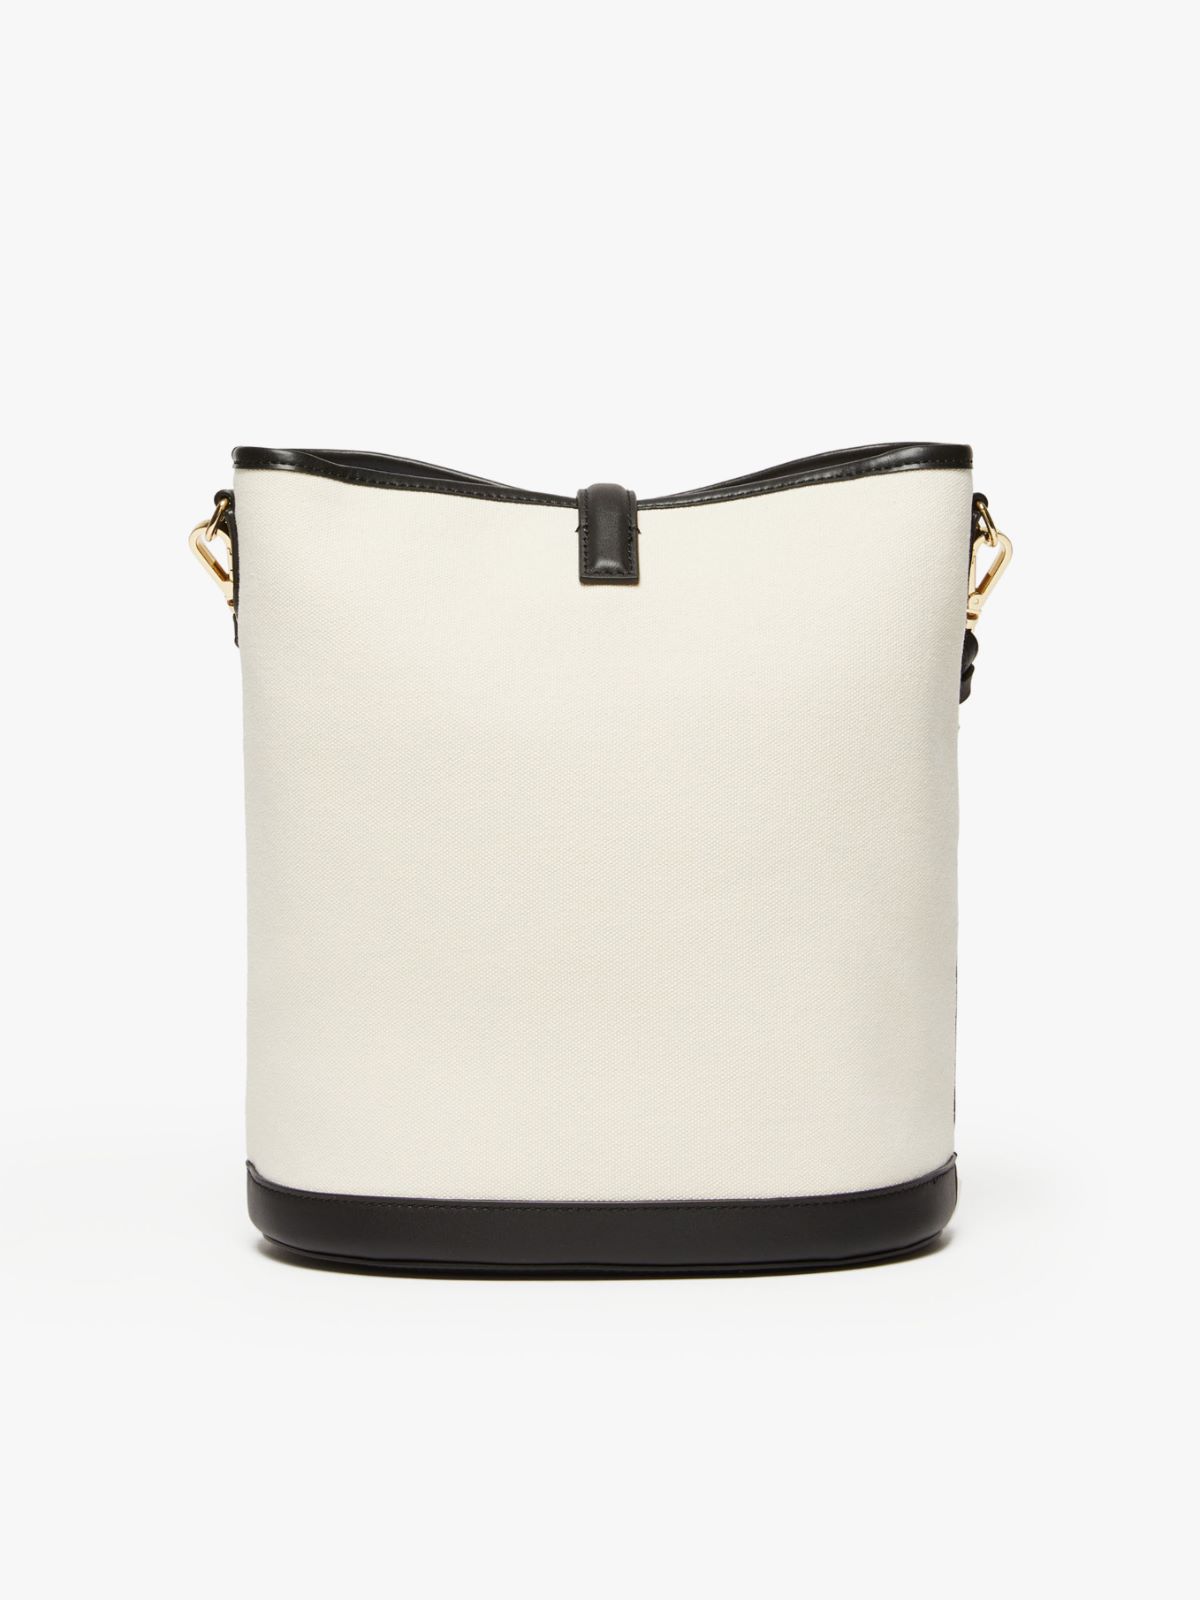 Canvas and leather bucket bag, ivory | Weekend Max Mara